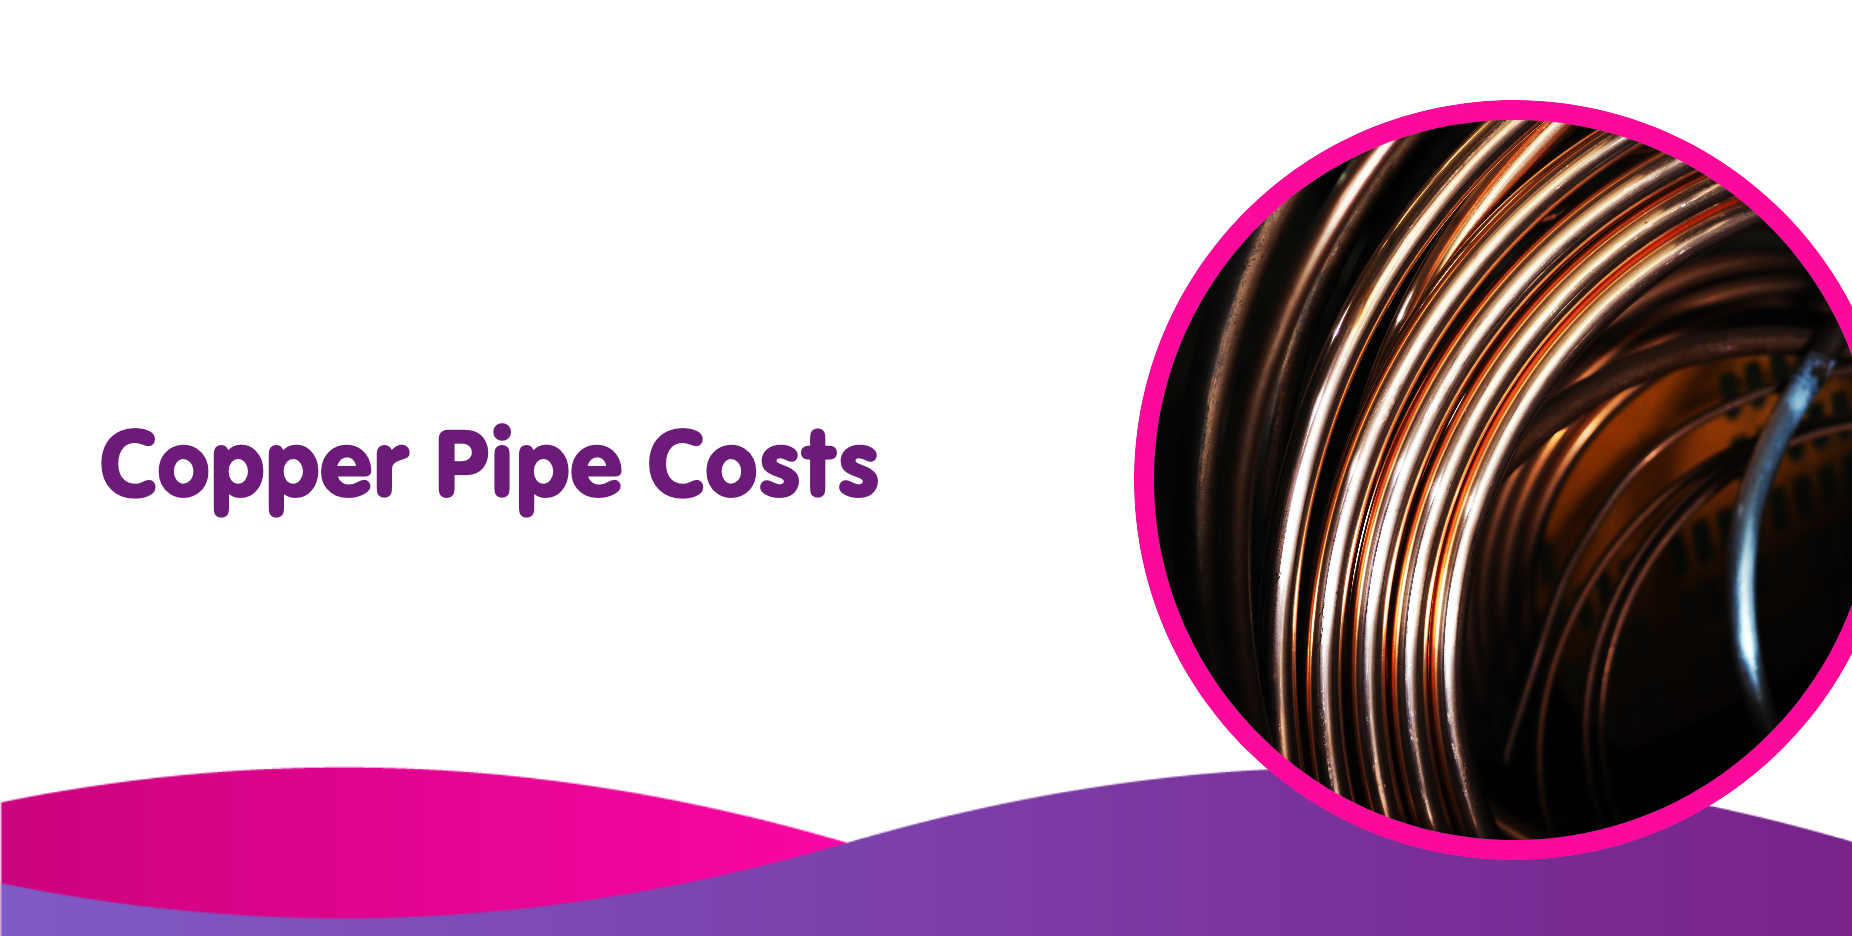 How Much Does Copper Piping Cost per Metre in the UK?